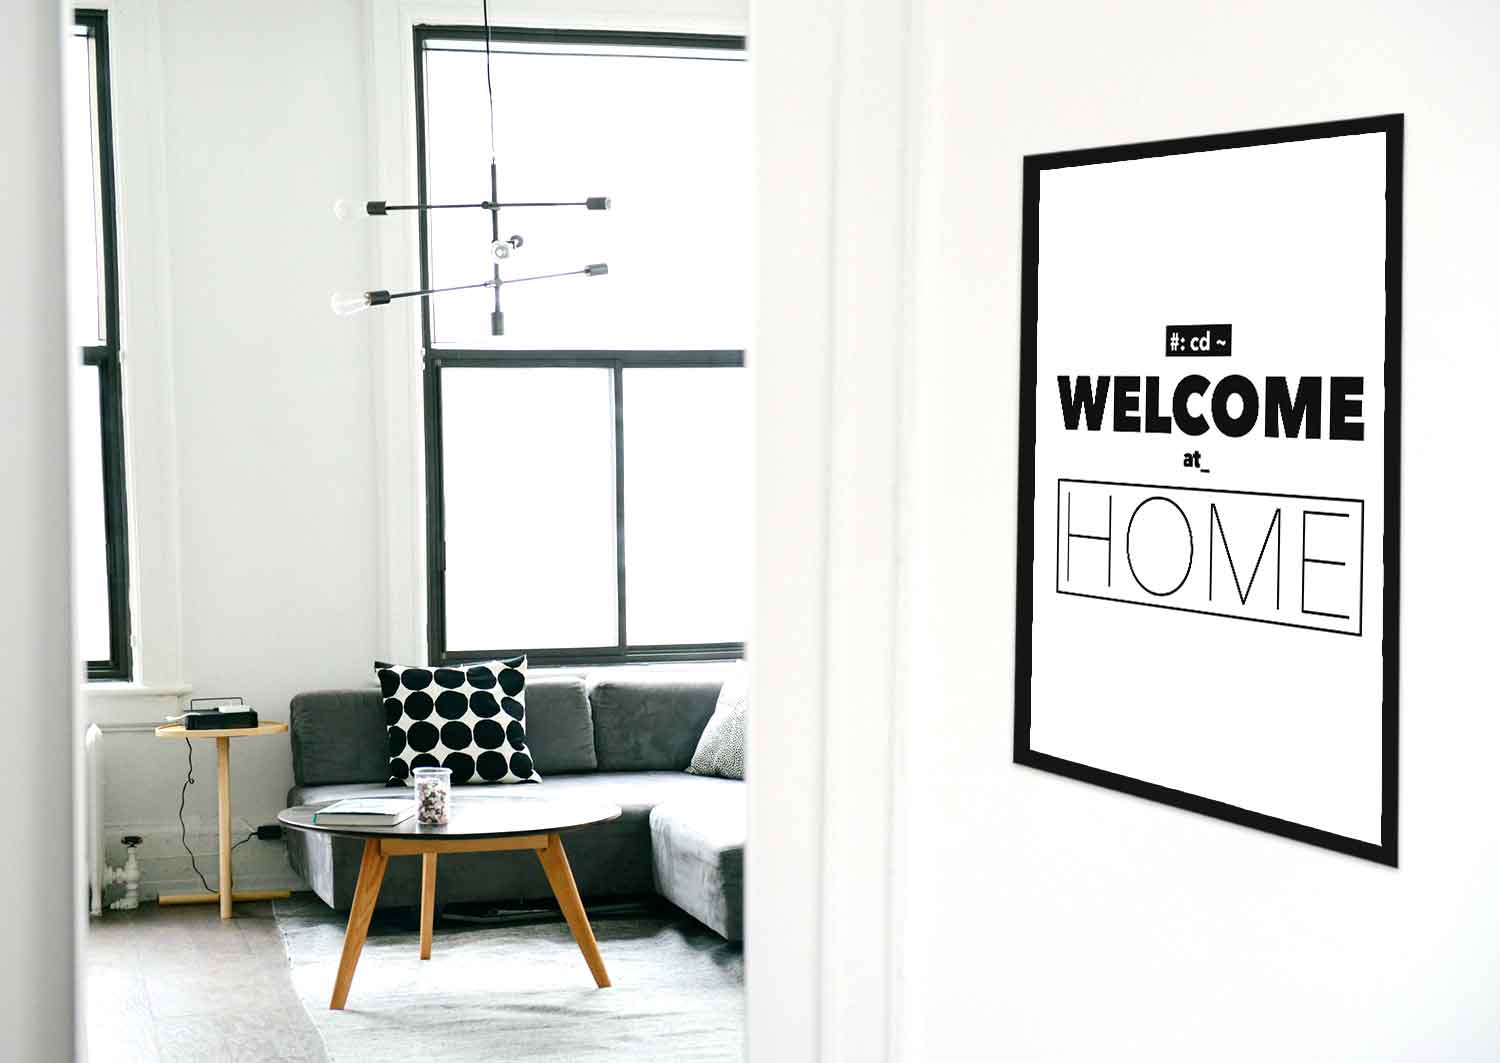 Image 1 - Welcome at Home Geek